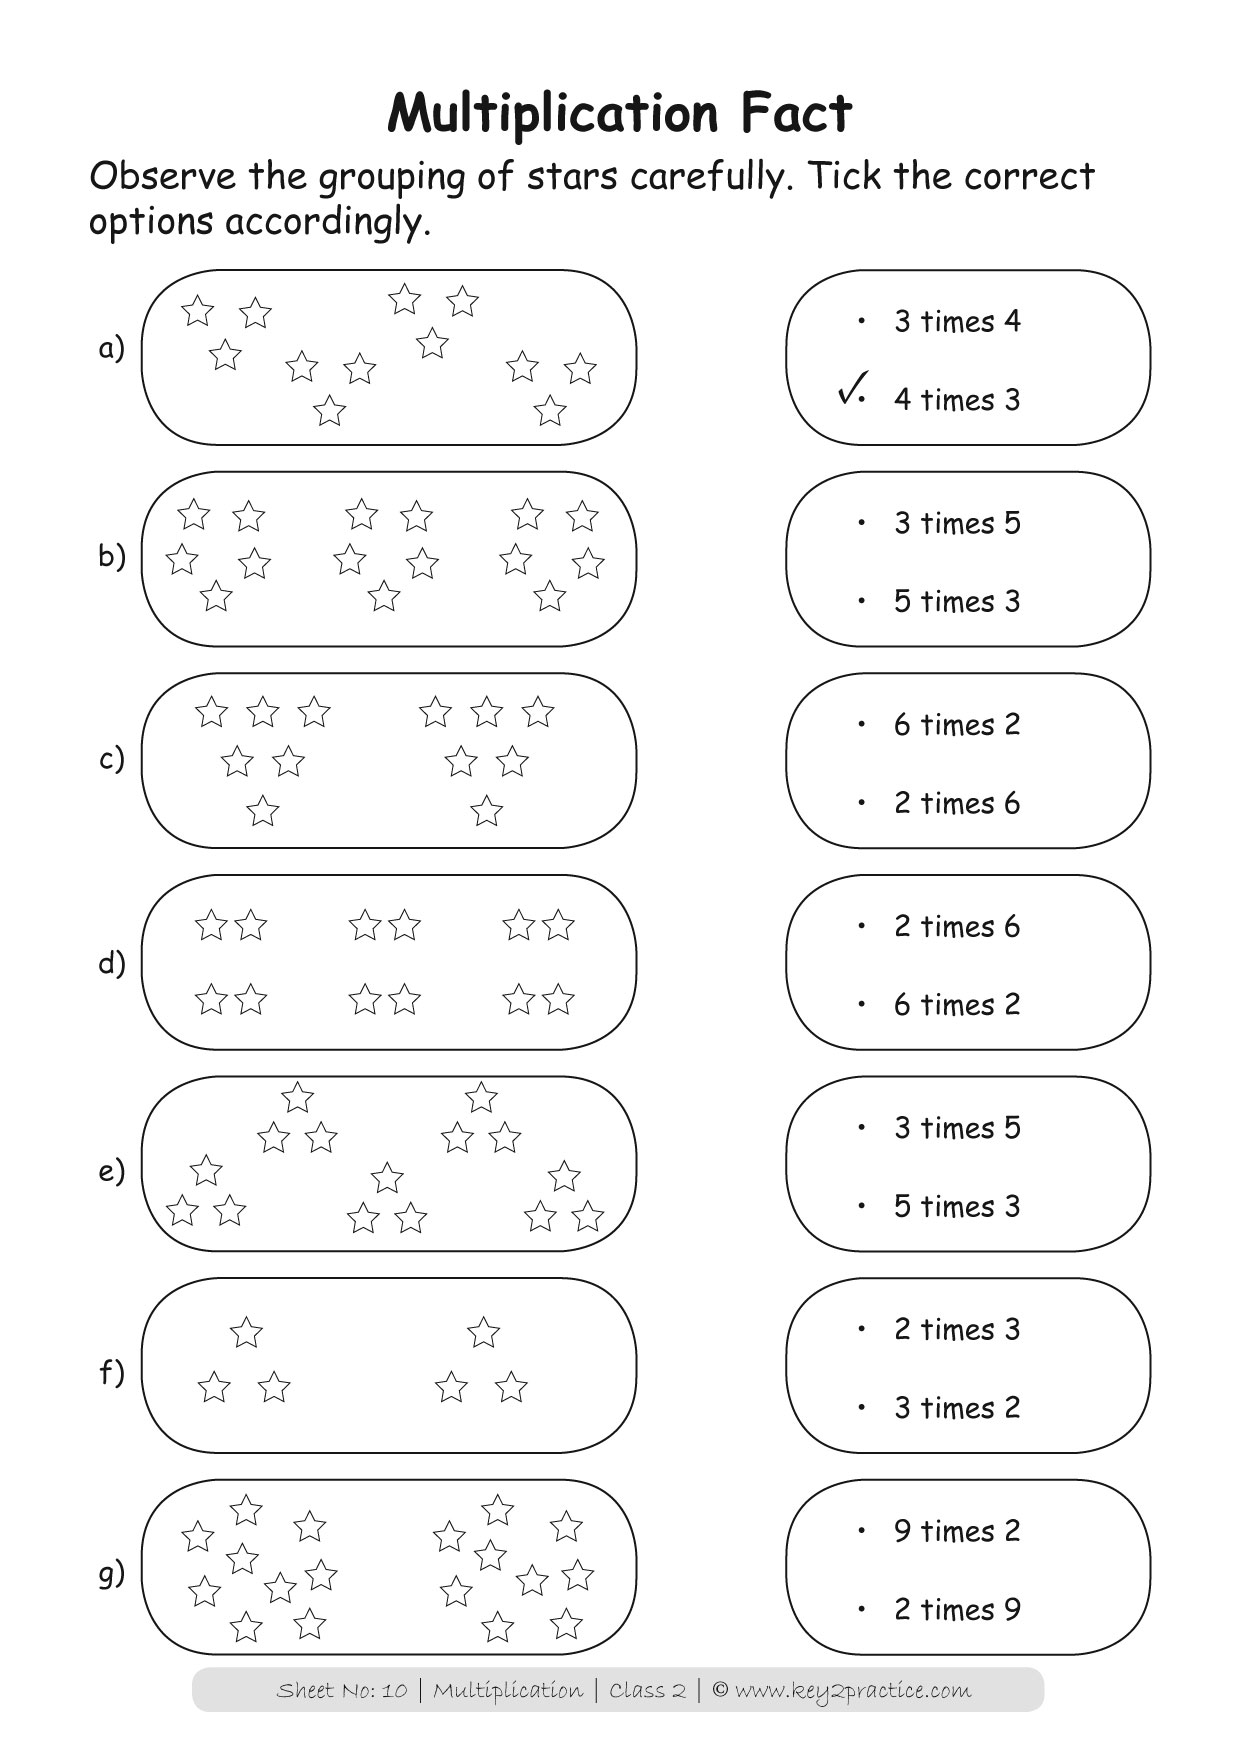 worksheet-on-multiplication-table-of-2-word-problems-on-2-times-table